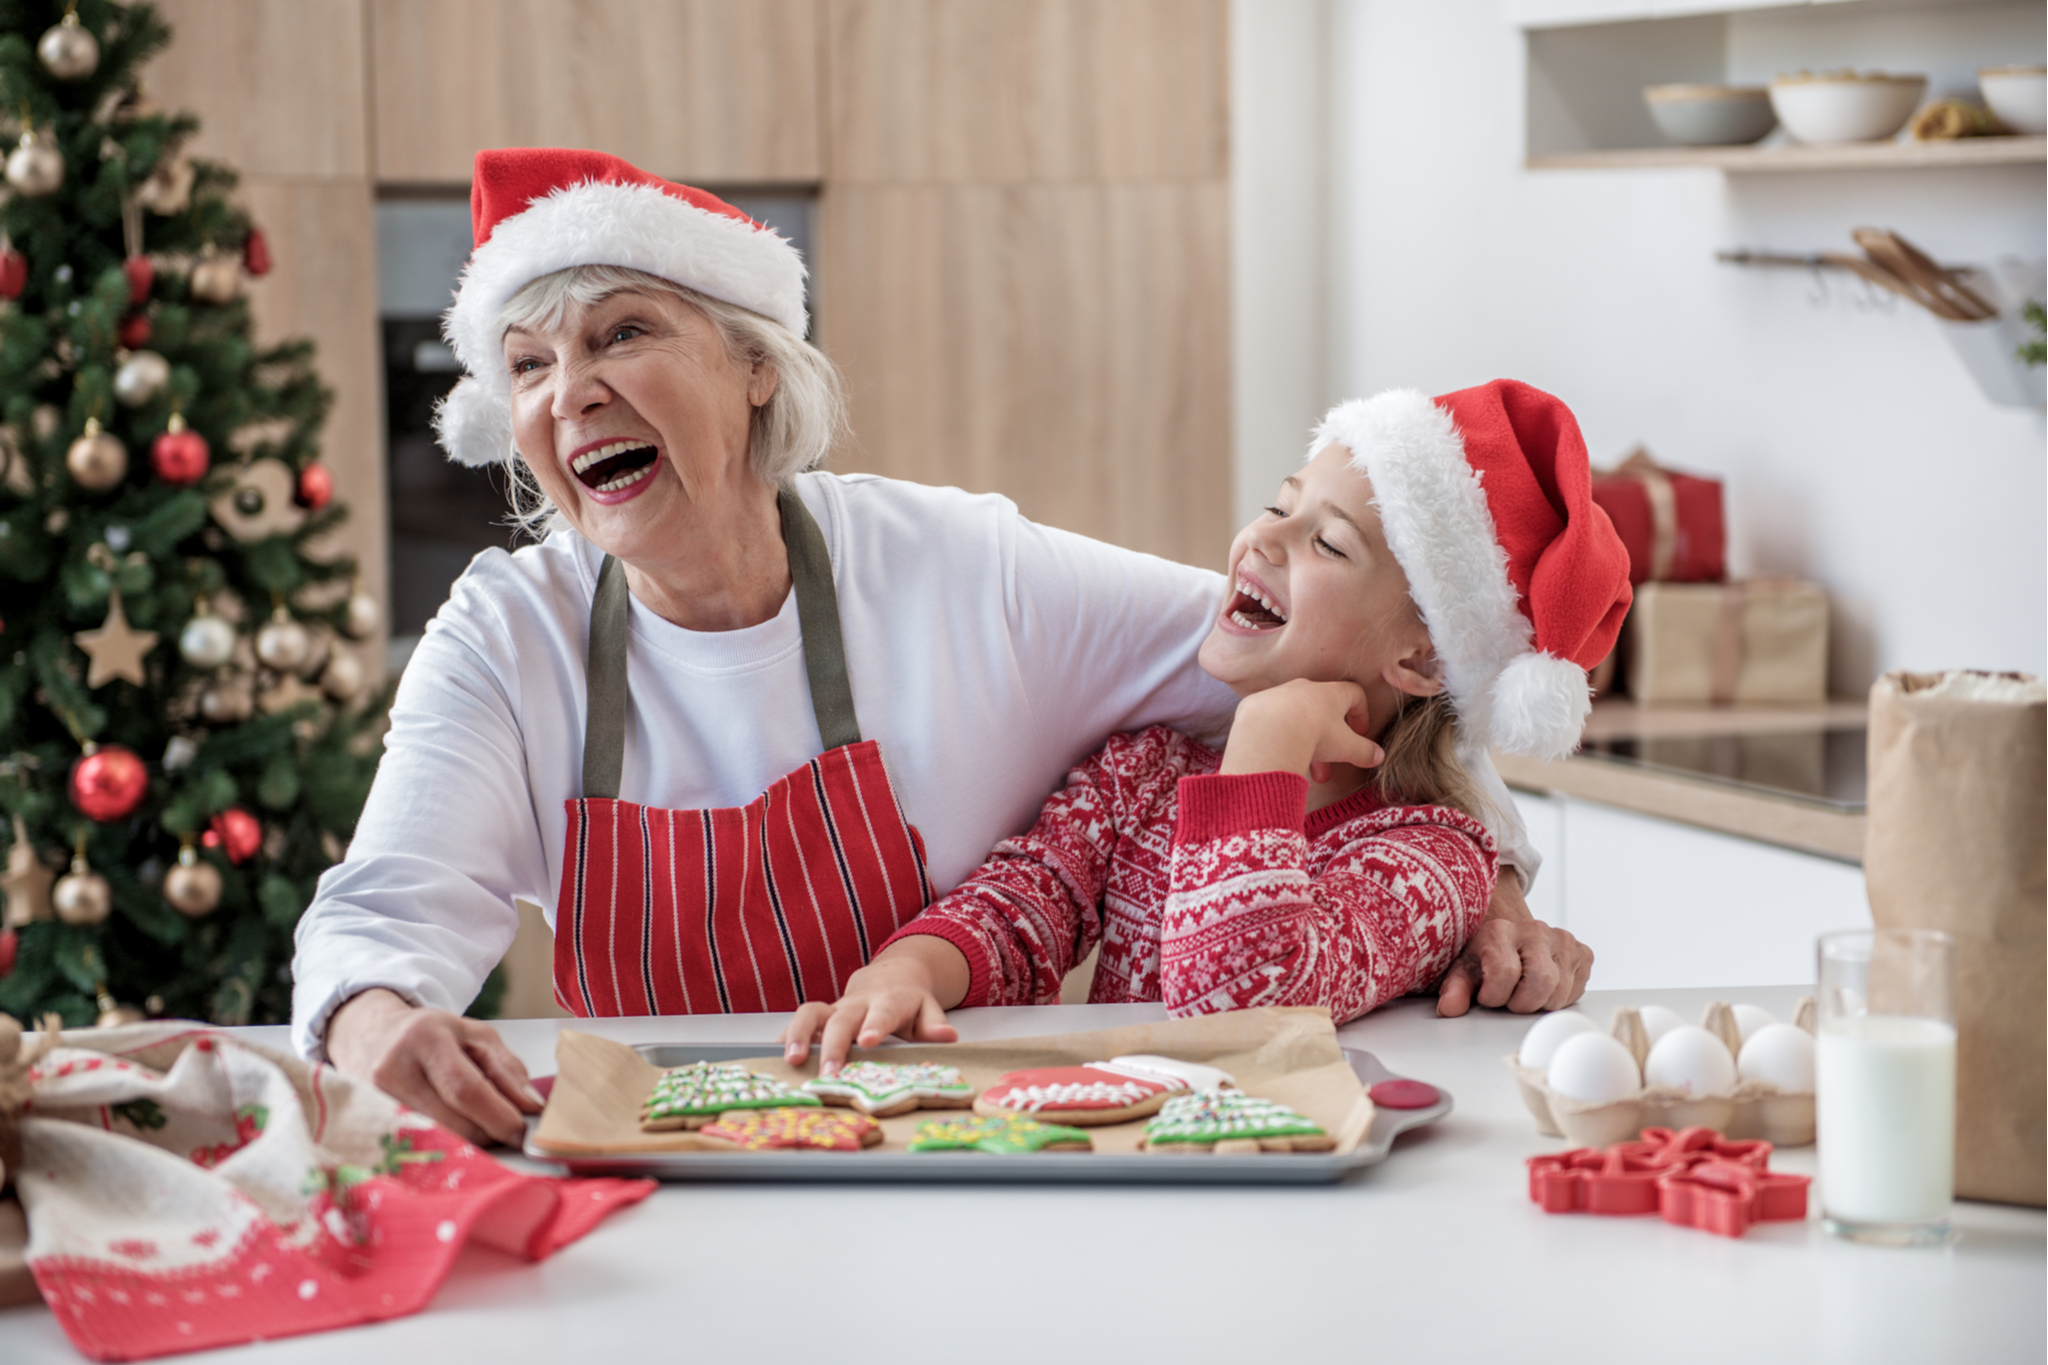 5 fantastic festive treats to make and enjoy with your children or grandchildren